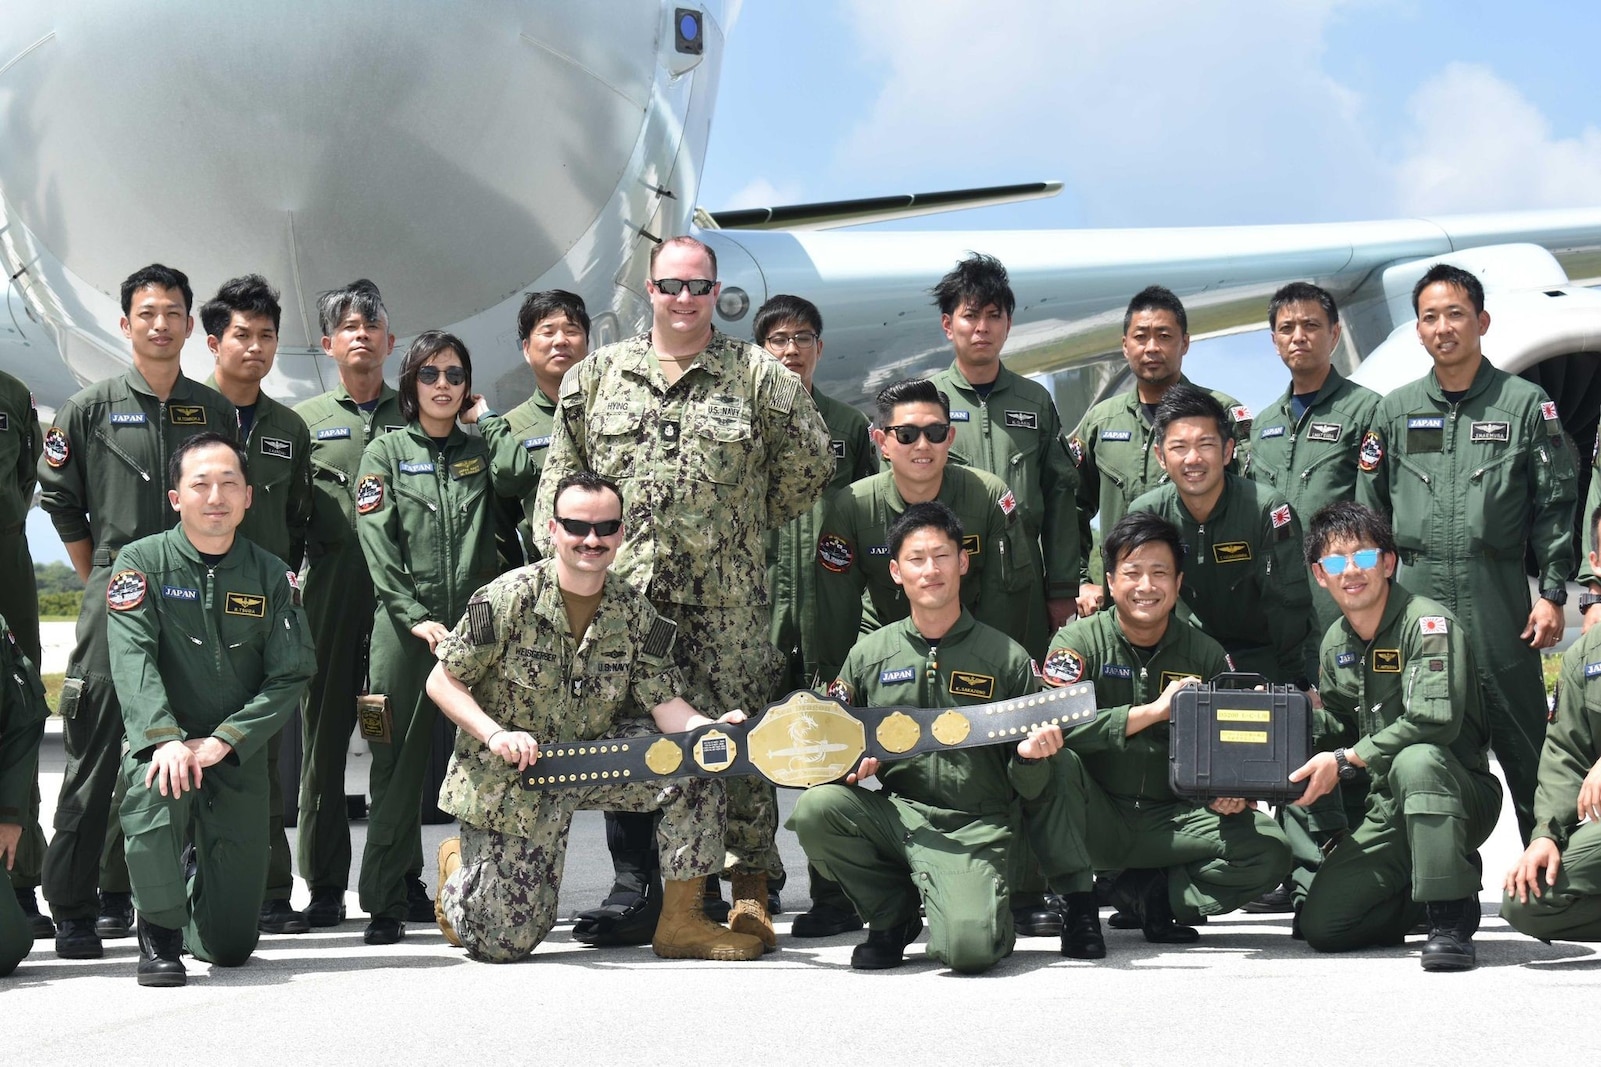 Winners of the highly competitive anti-submarine warfare (ASW) competition, aircrew and maintenance personnel from the Japan Maritime Self-Defense Force (JMSDF) pose with the Sea Dragon Championship Belt with Chief Aerographer’s Mate Kirk Hying and Aerographer’s Mate 1st Class Andrew Weisgerber in front of a JMSDF Kawasaki P-1.